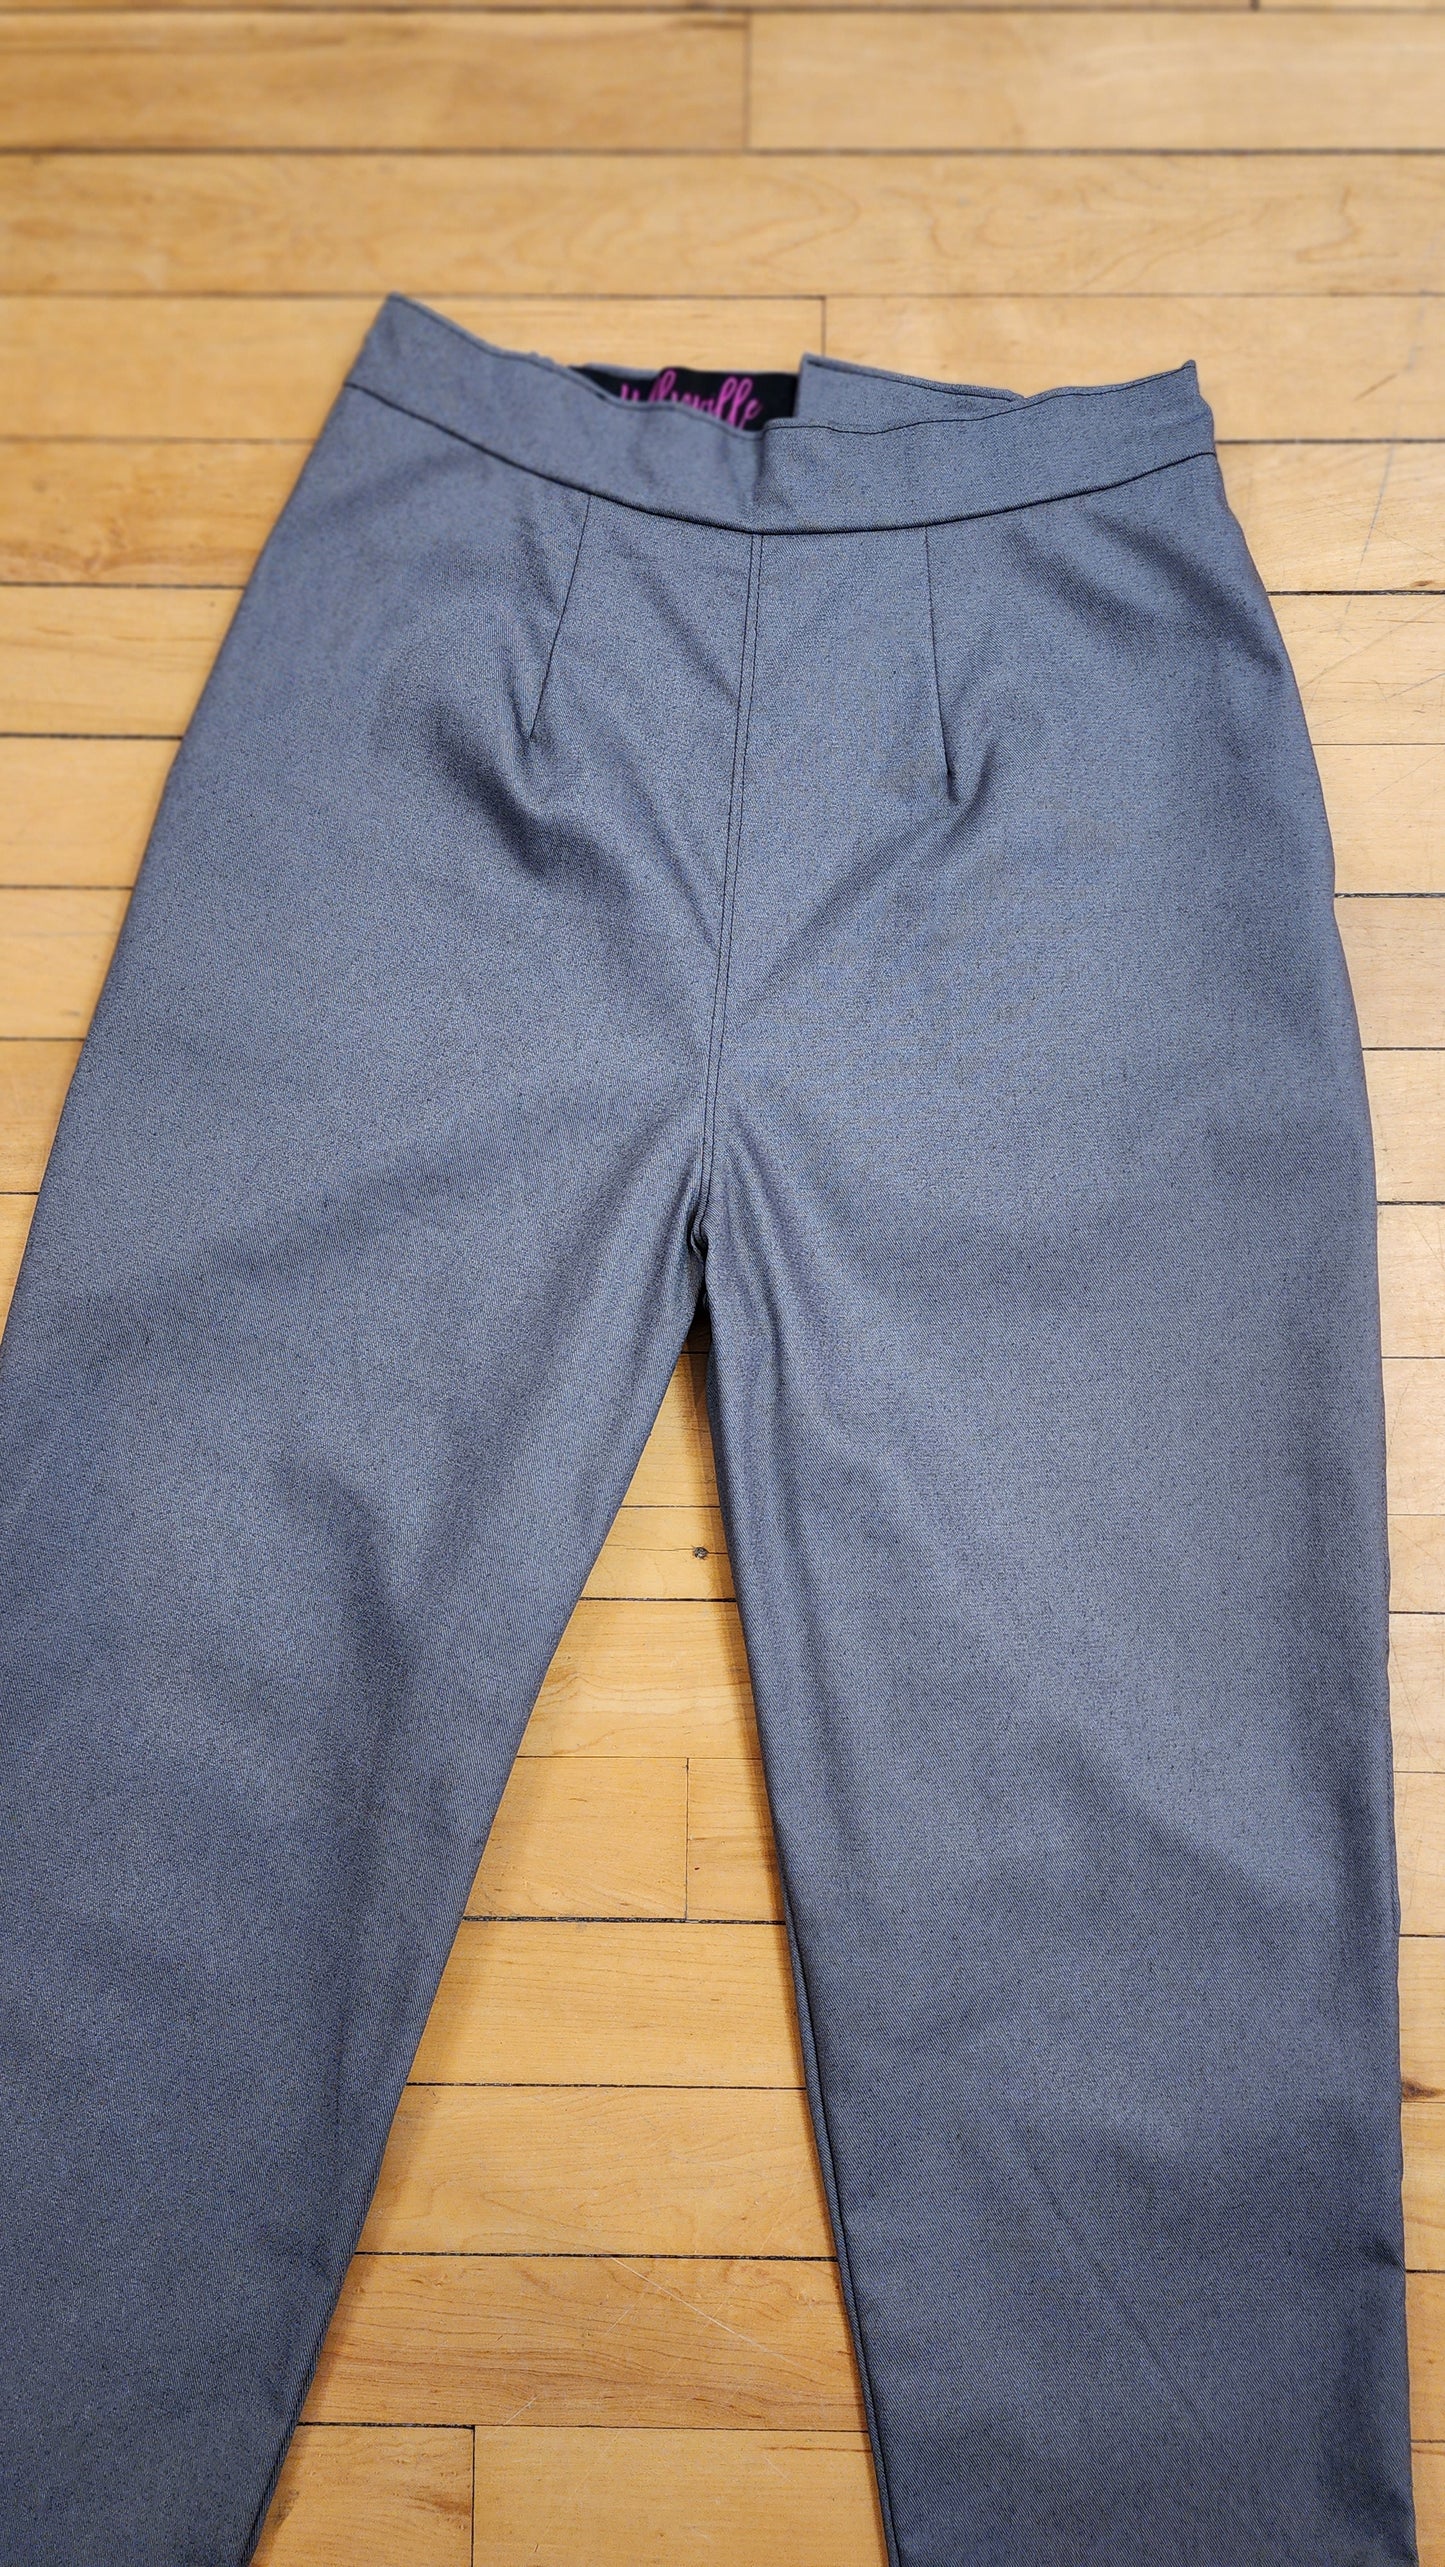 Grey Capris by Hollyville